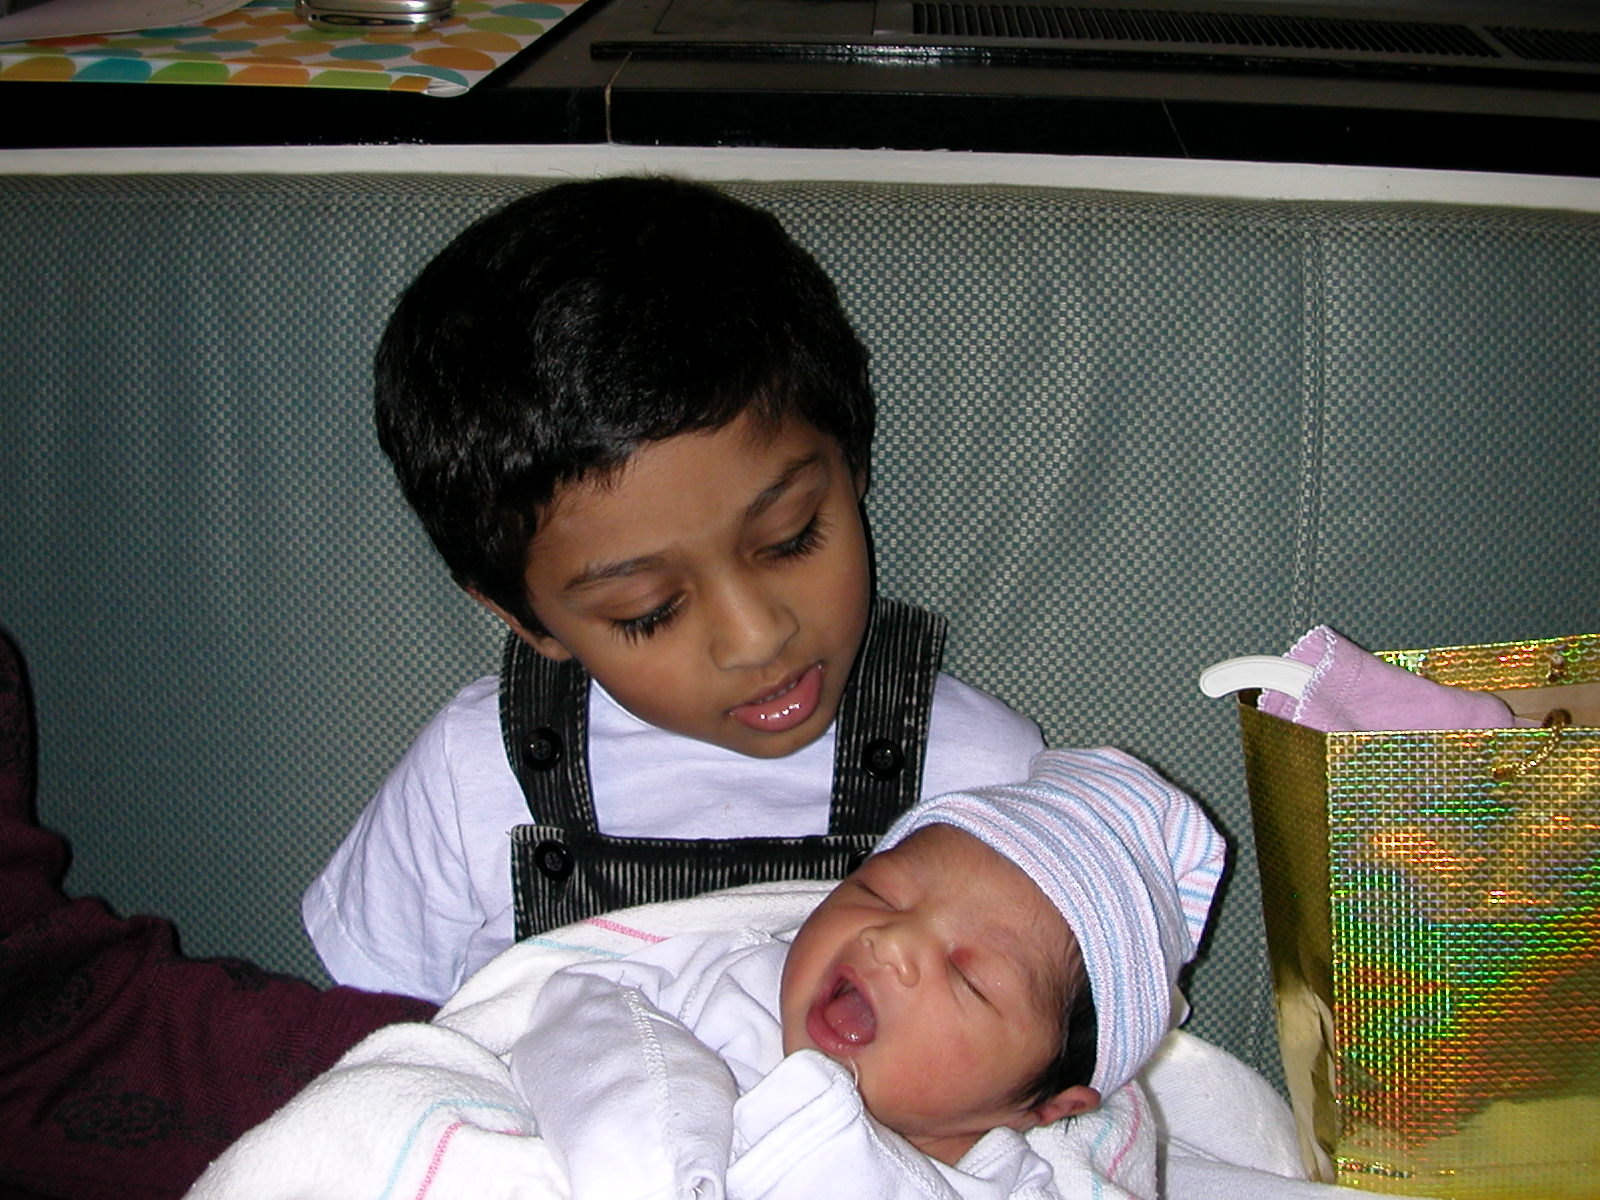 Older brother carefully holding his sister